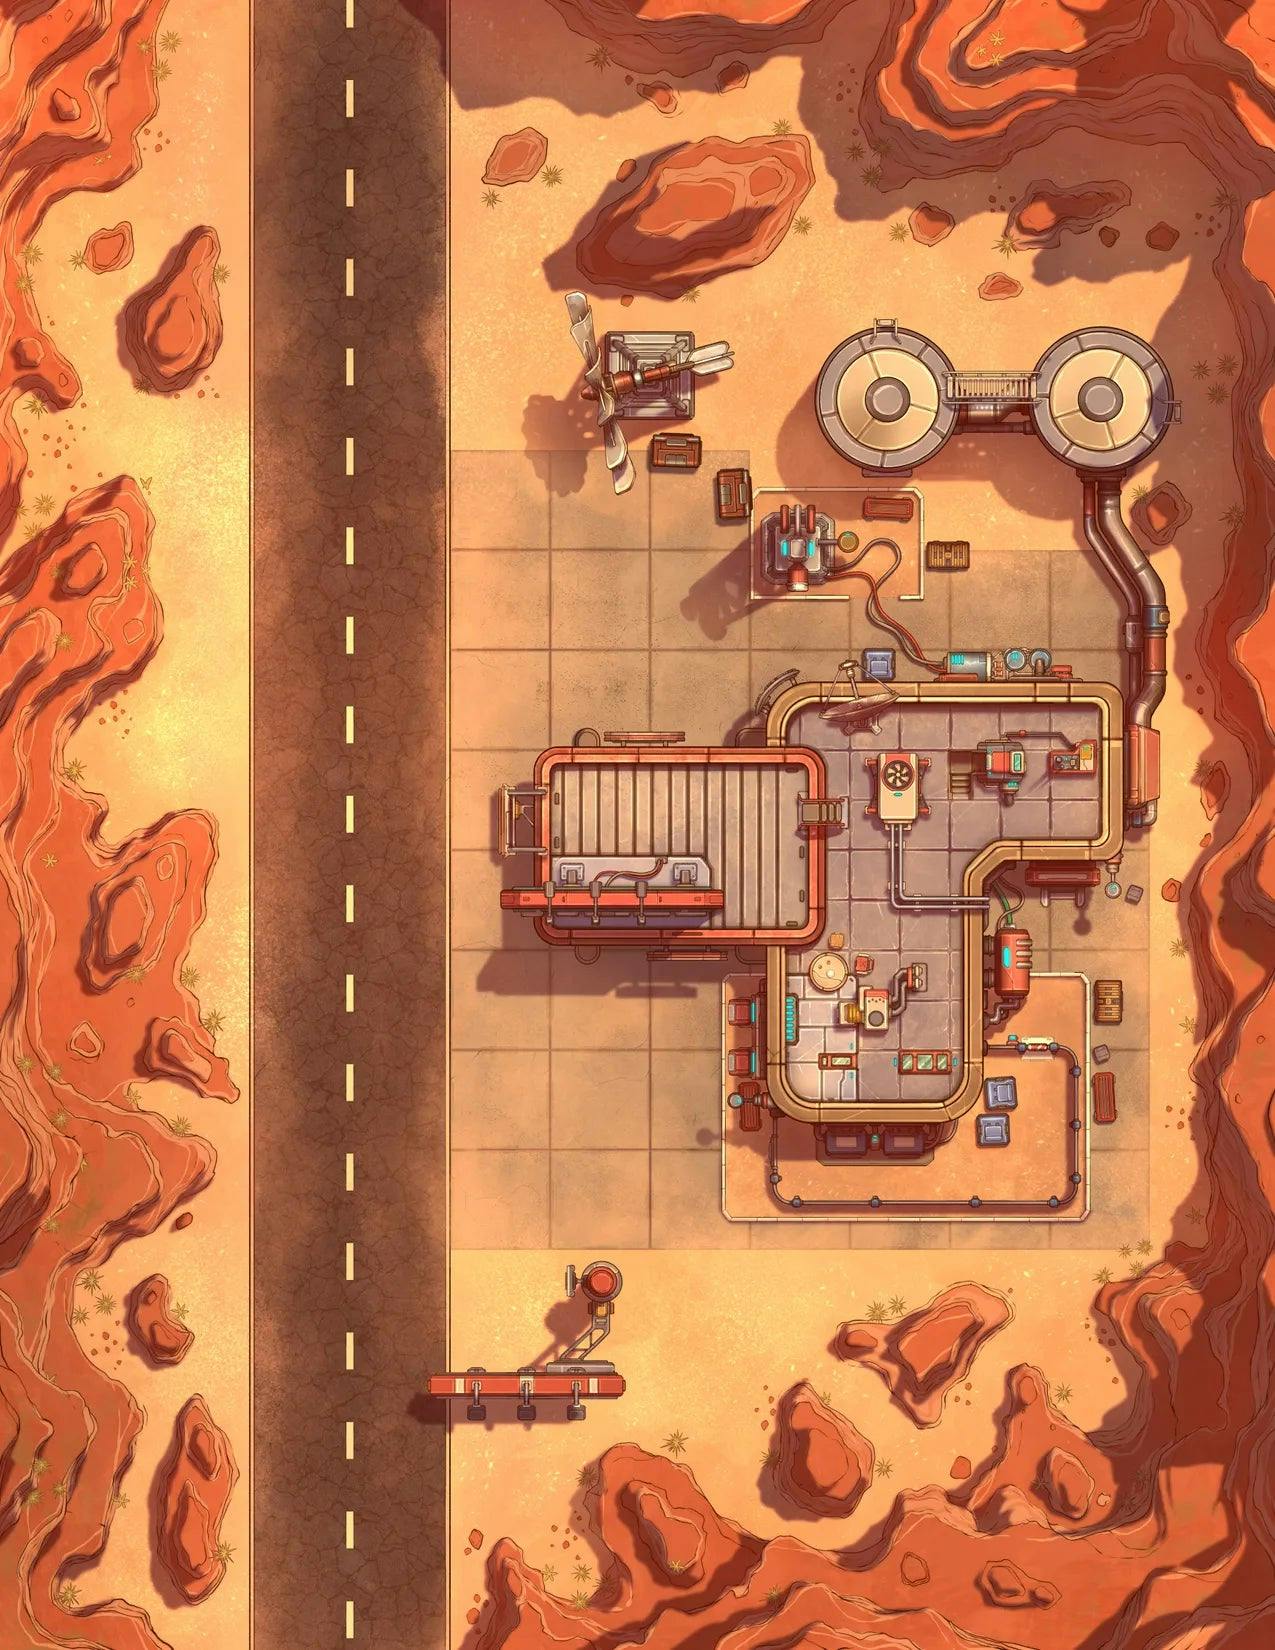 Apocalyptic Fuel Station